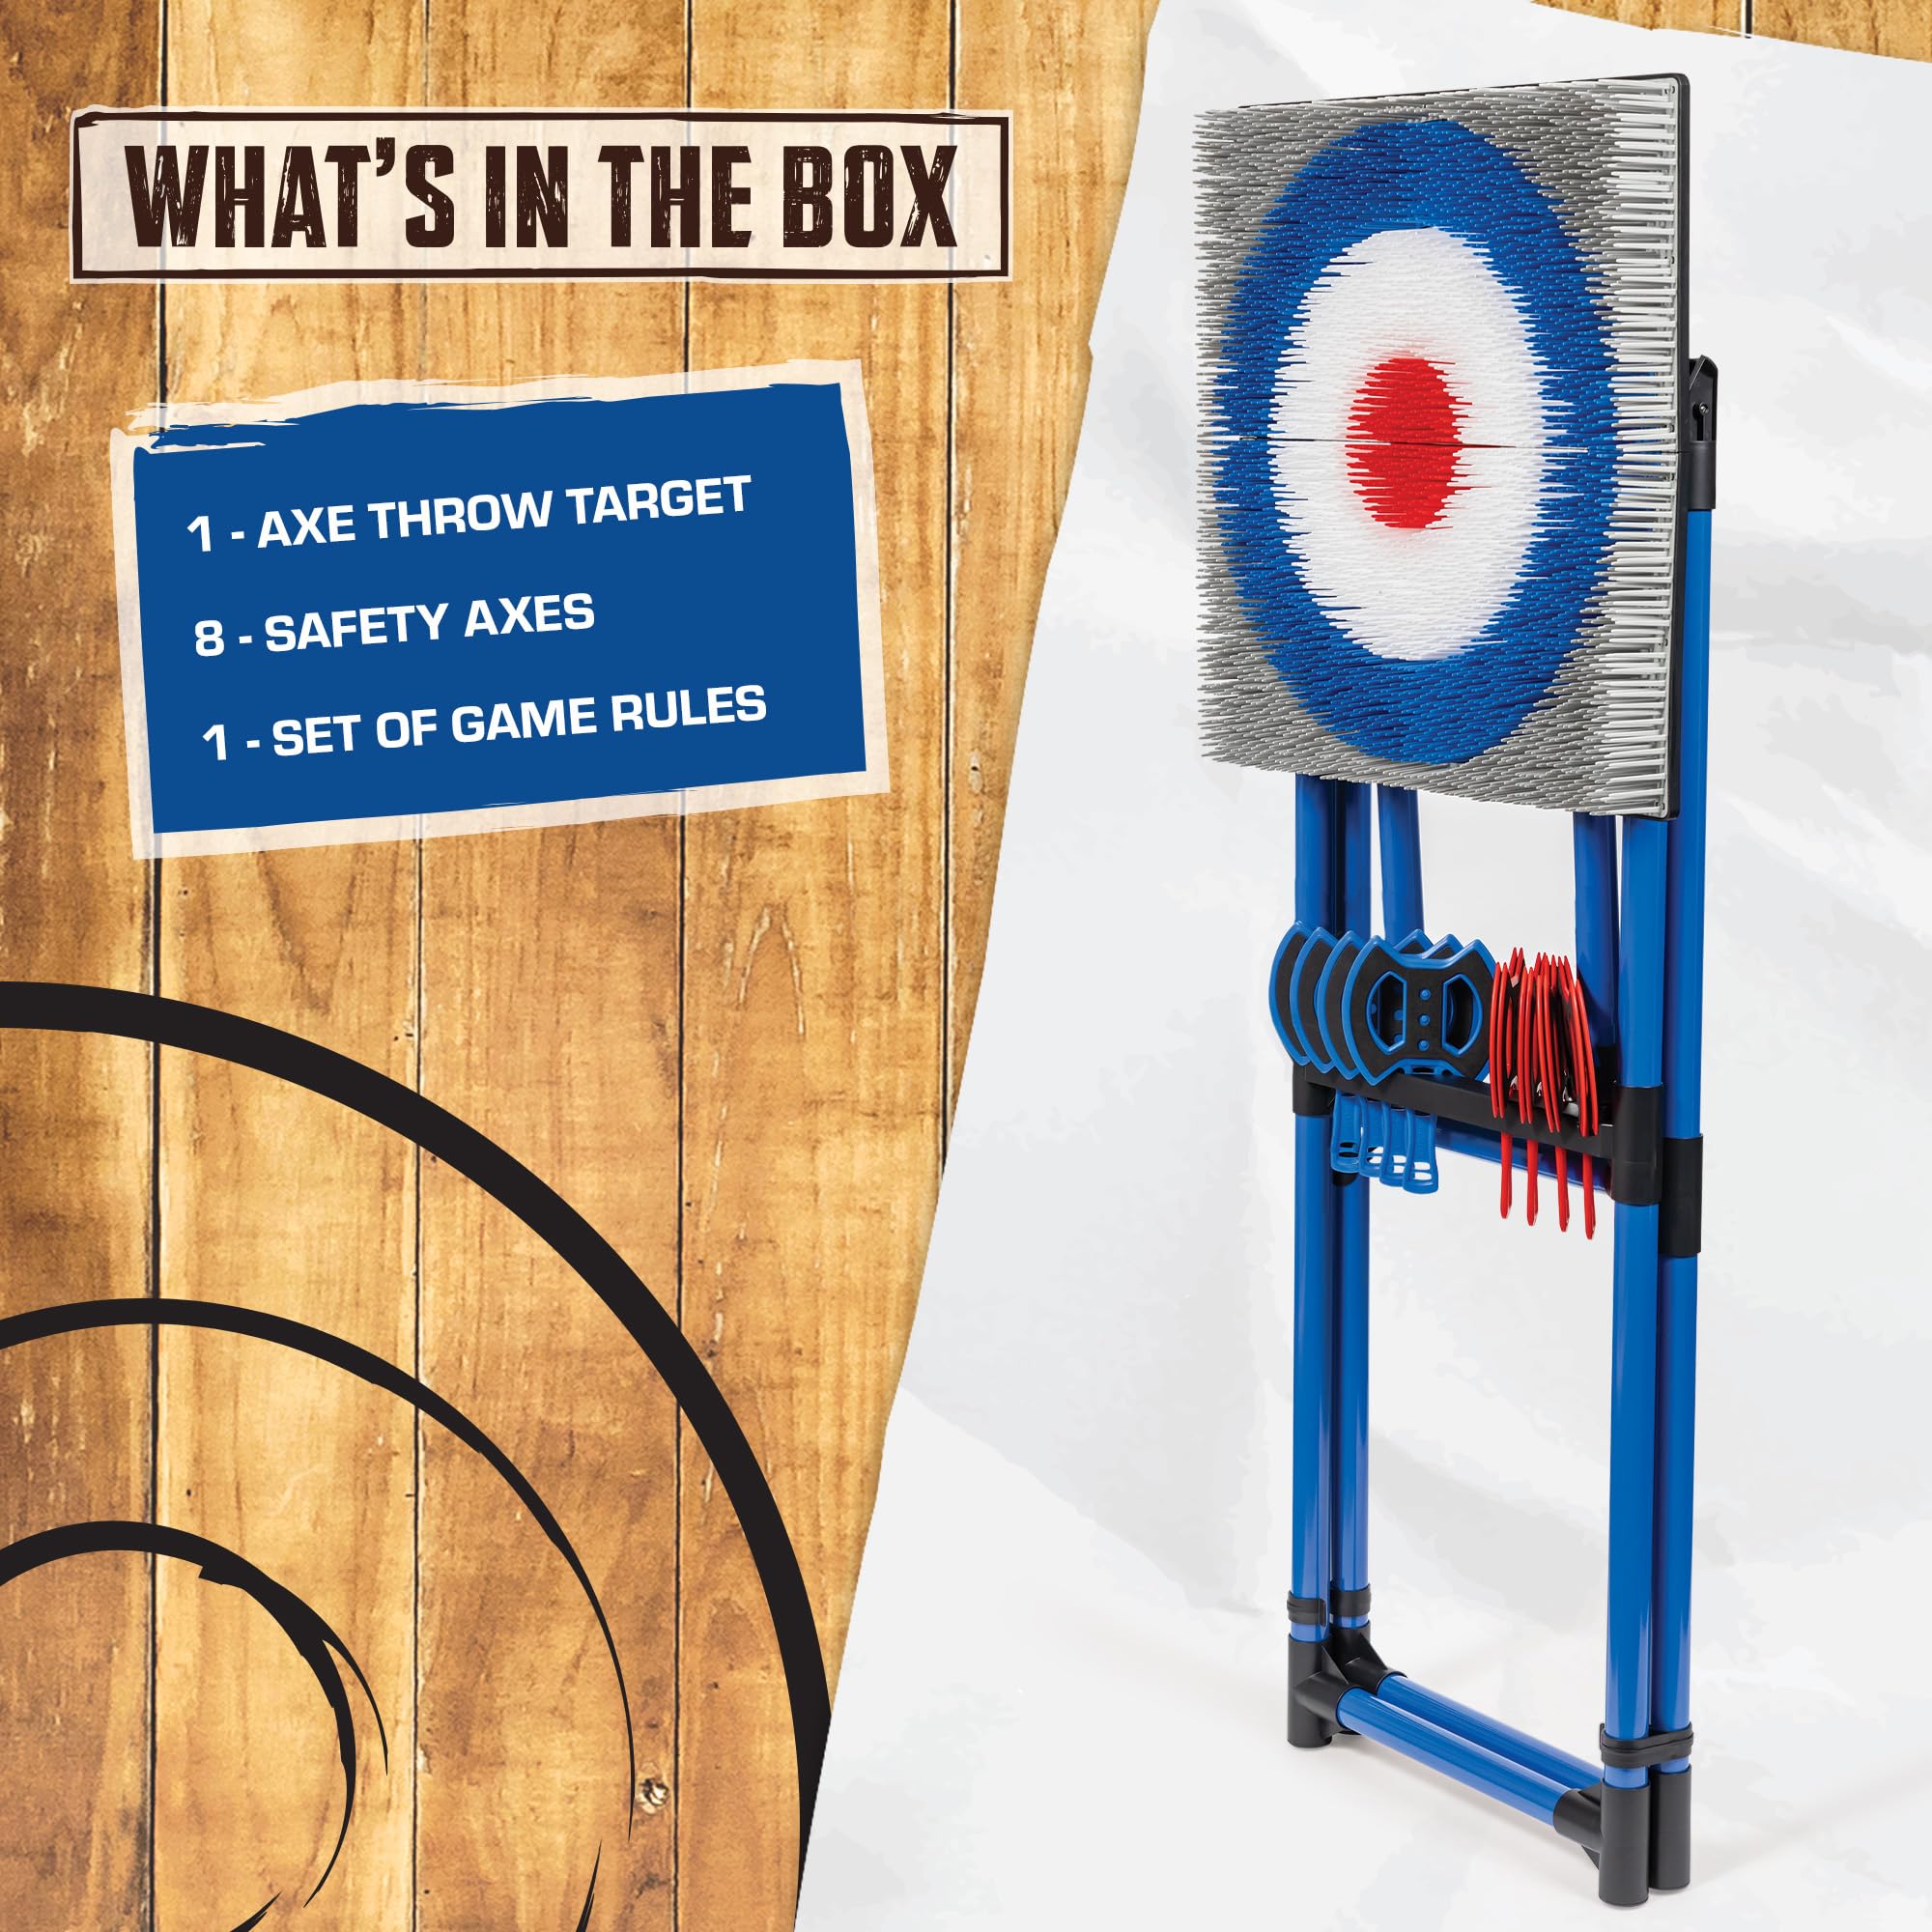 EastPoint Sports Backyard Axe Throw Target Game – Steel Frame Outdoor Game with 8 Throwing Axes, Portable for Backyard or Park